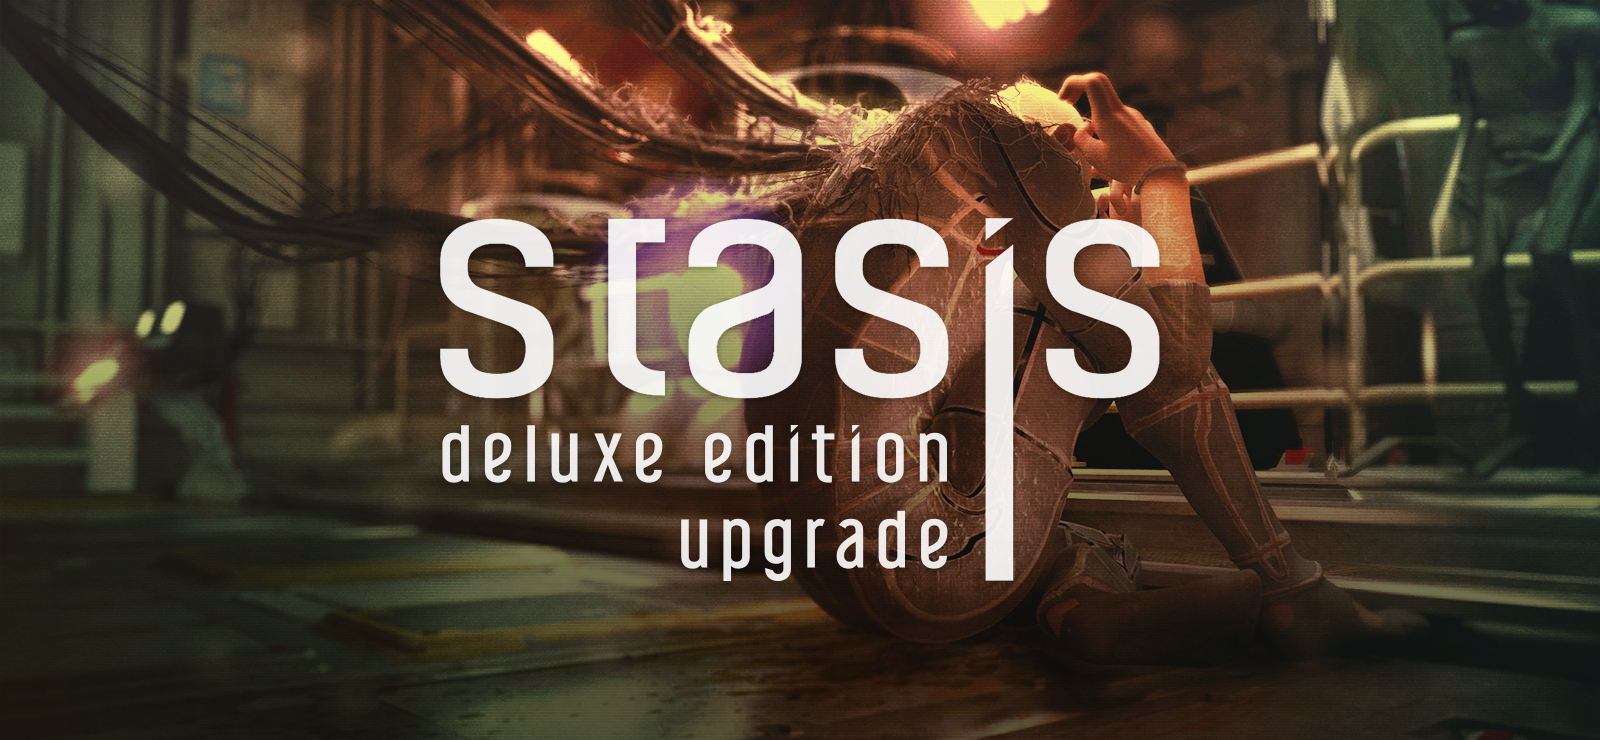 STASIS: Deluxe Edition Upgrade